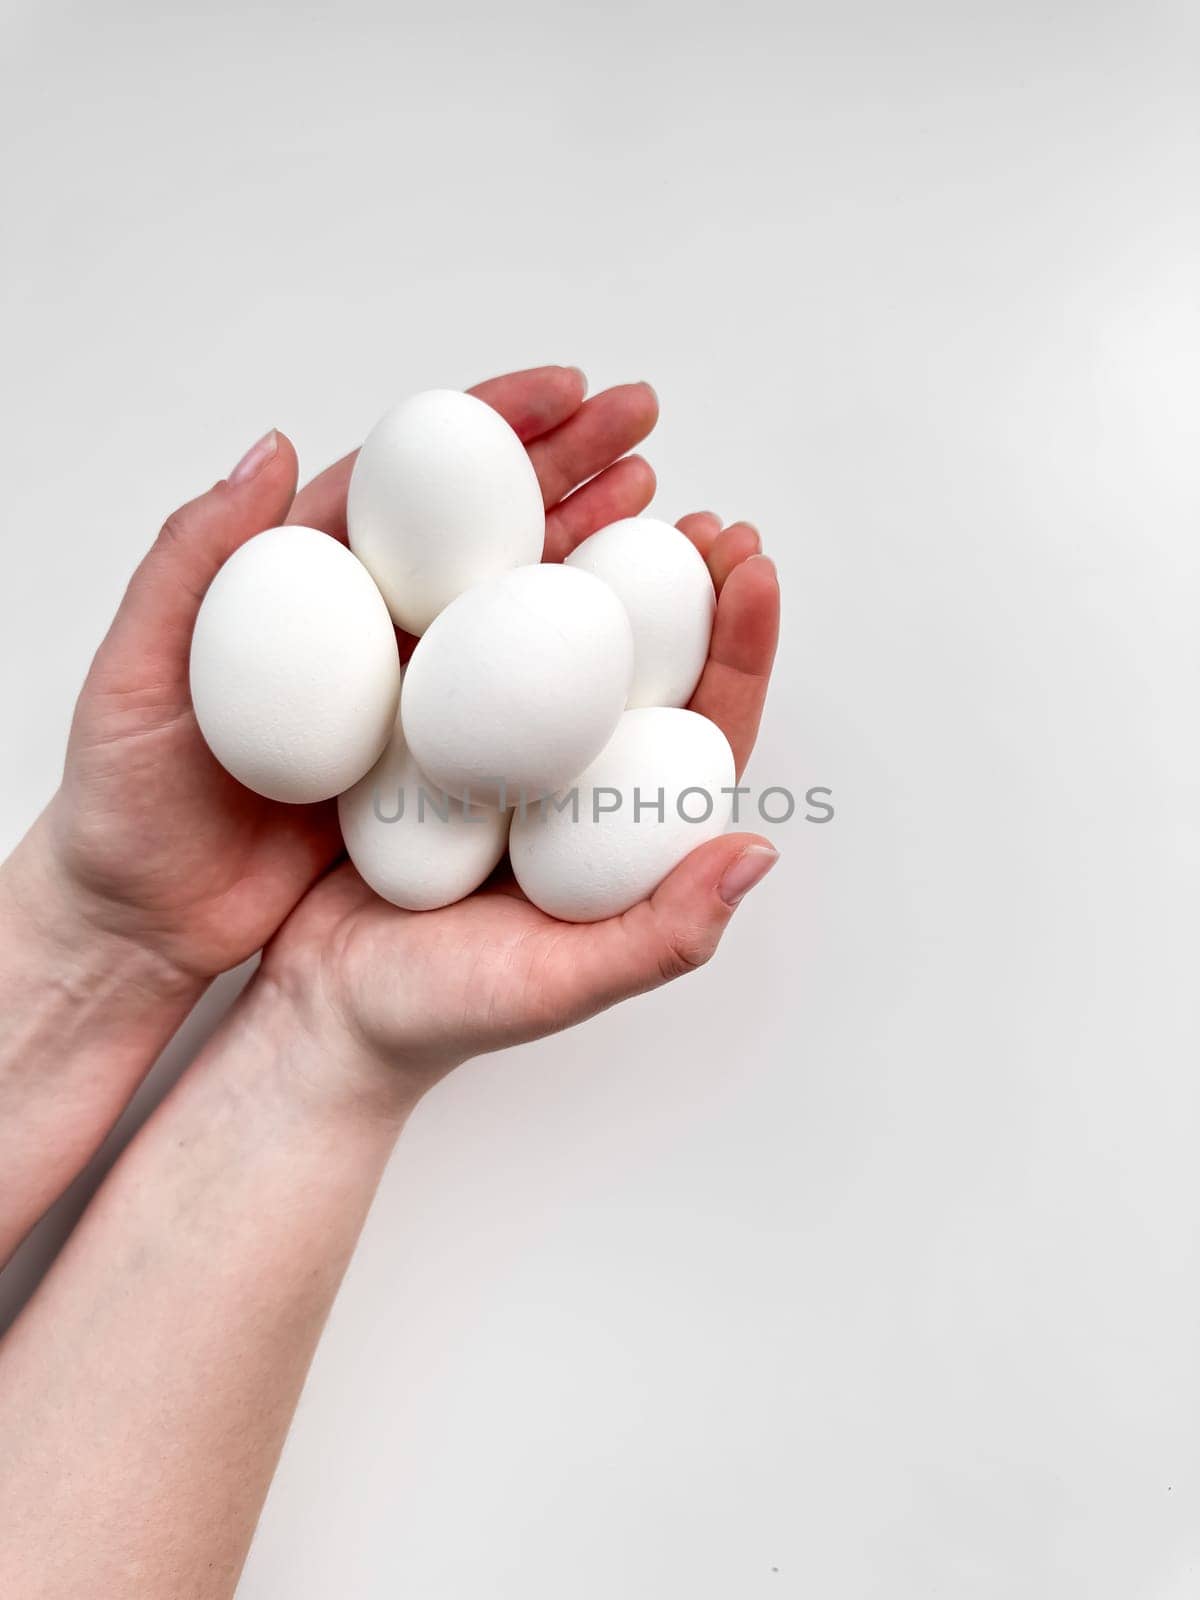 Hands cradling a cluster of white eggs against pale background, a symbol of care, nourishment, and new beginnings with ample copy space. For culinary websites, recipe blogs, and nutritional guides. by Lunnica